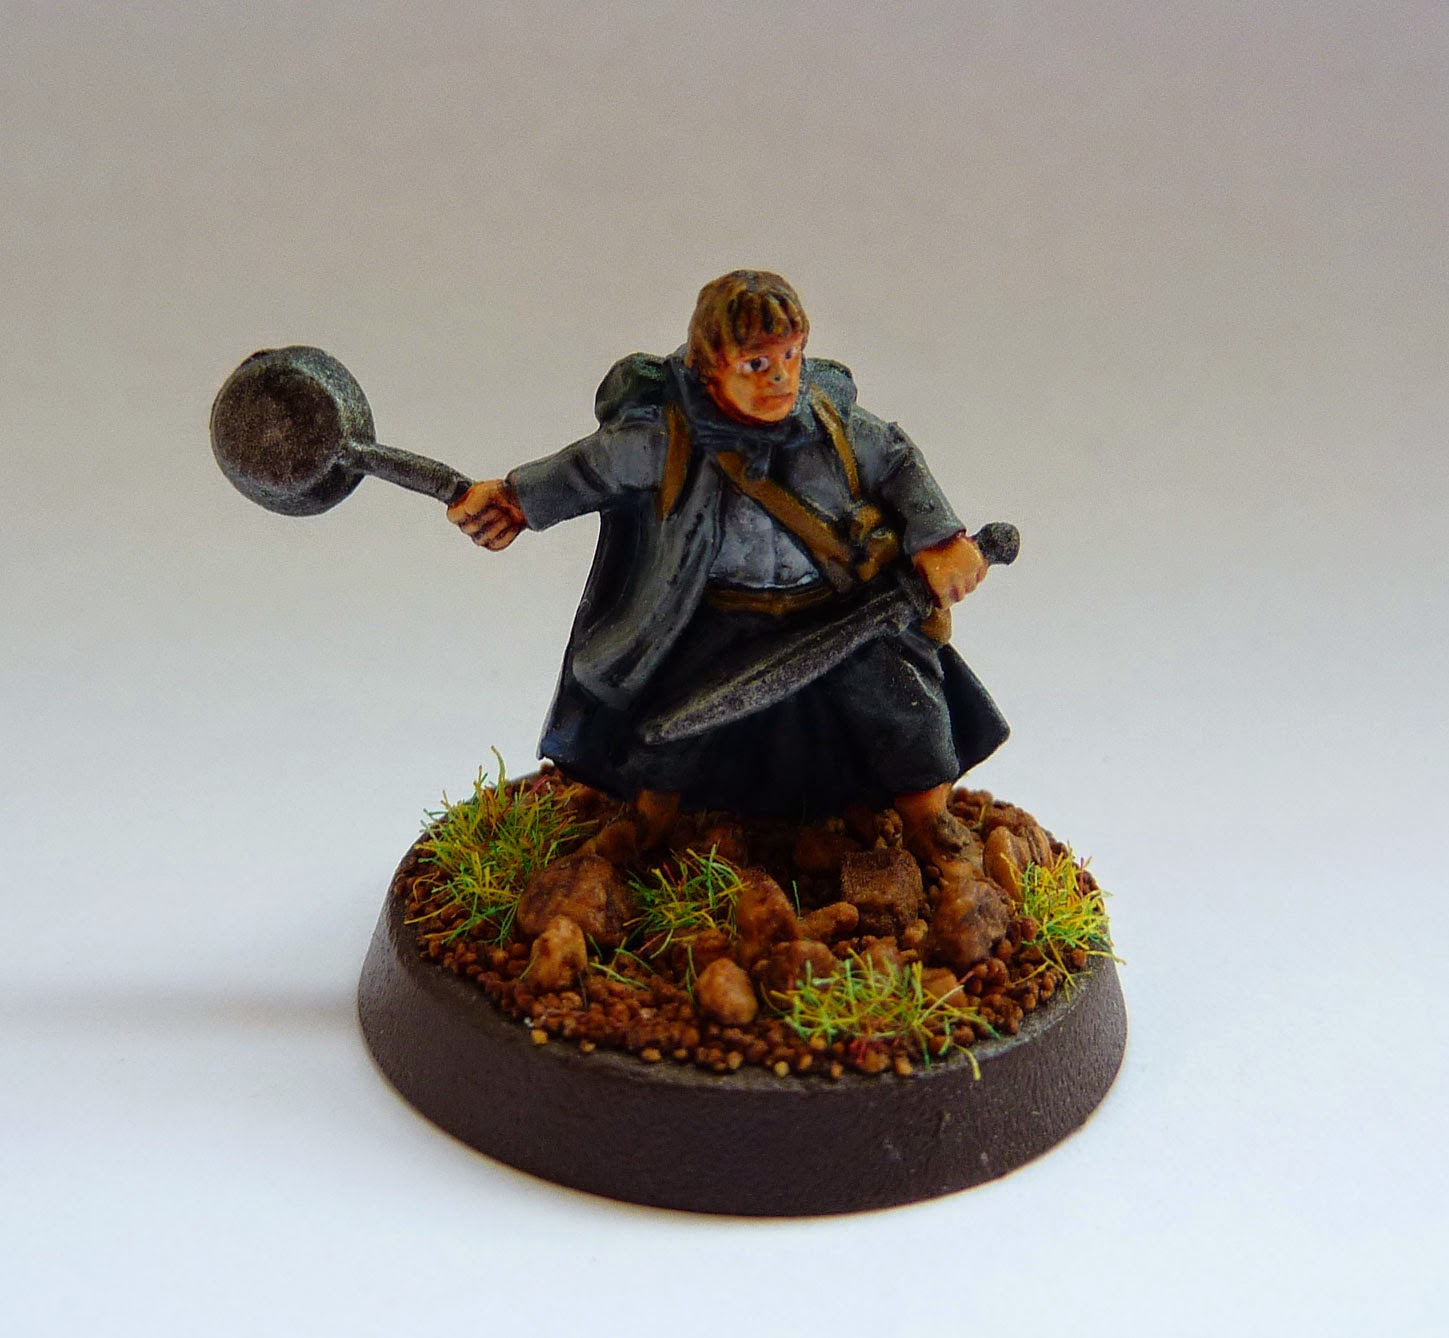 Lord of the Rings Samwise